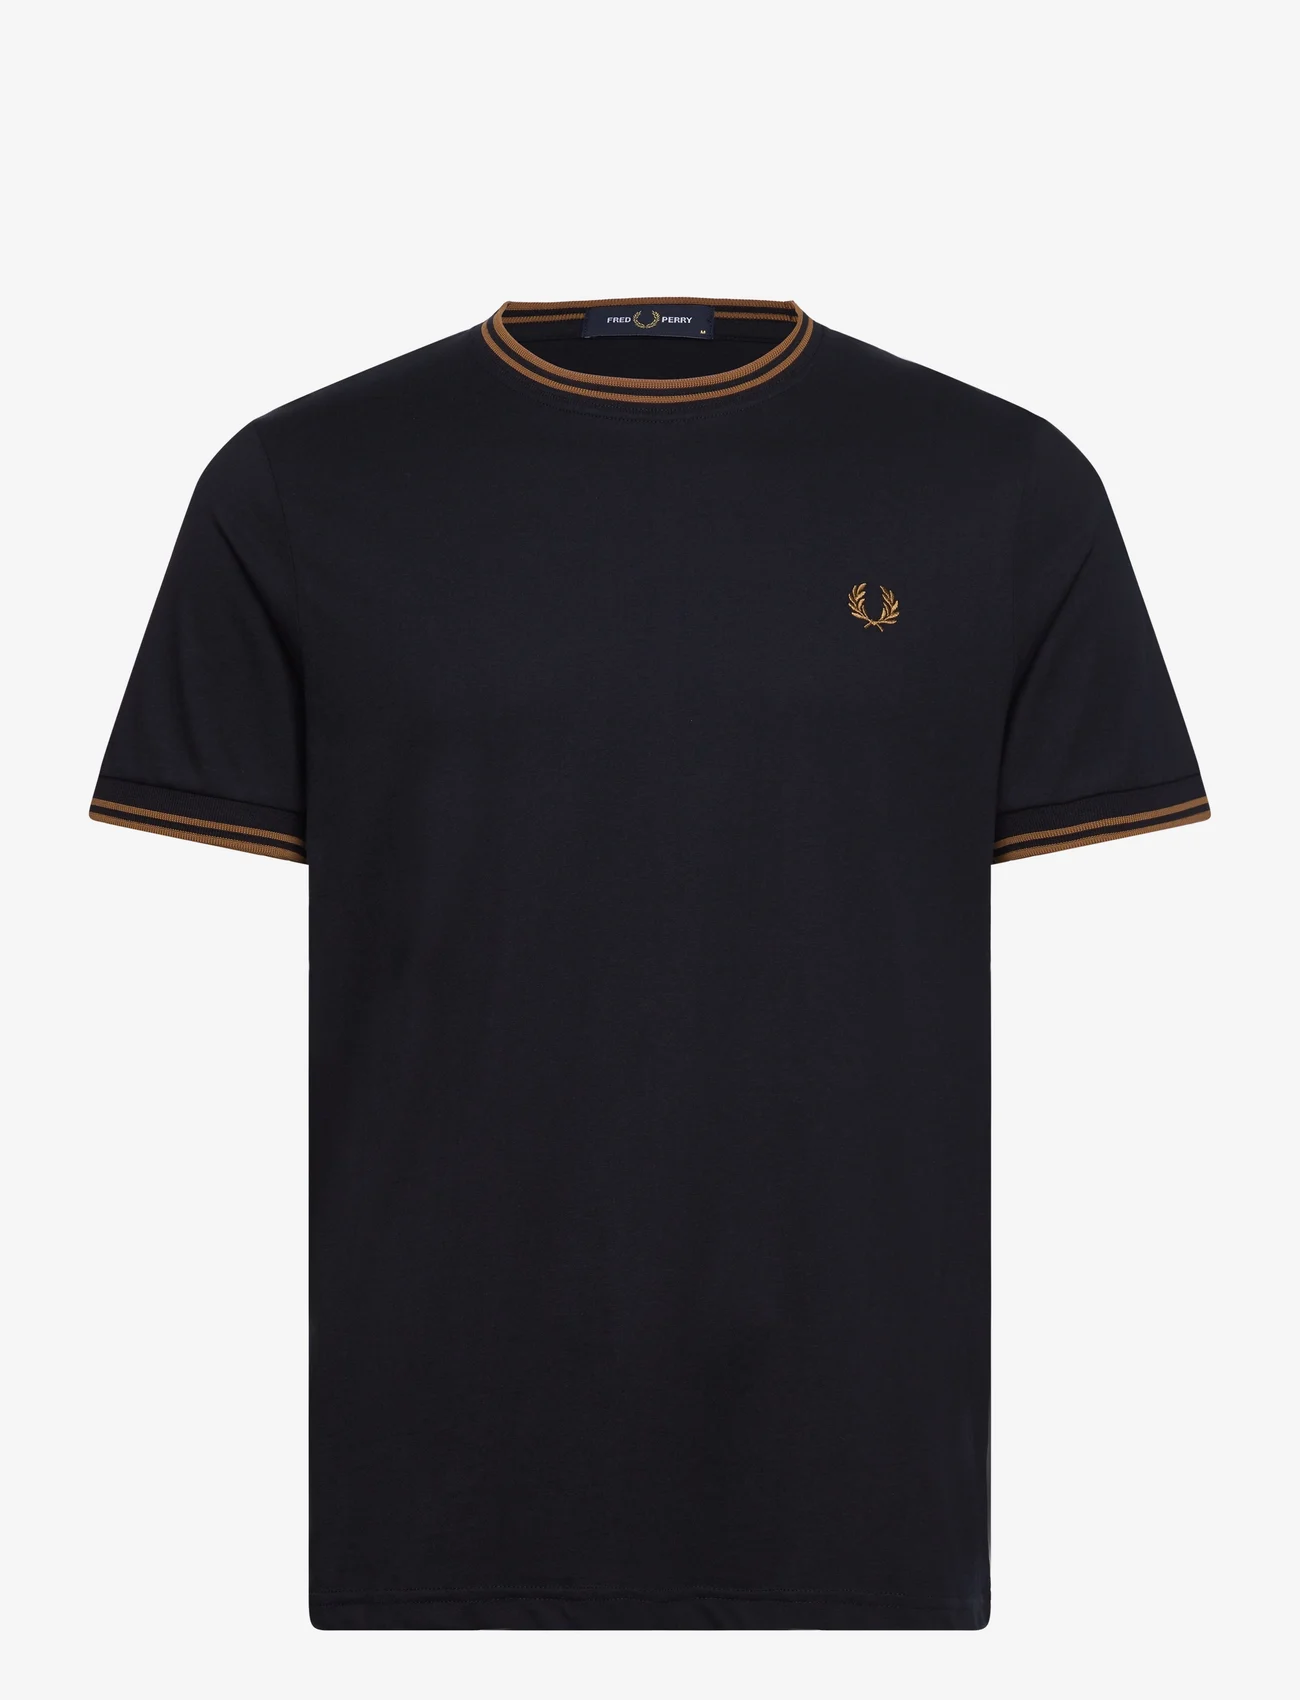 Fred Perry - TWIN TIPPED T-SHIRT - basis-t-skjorter - nvy/drk caramel - 0